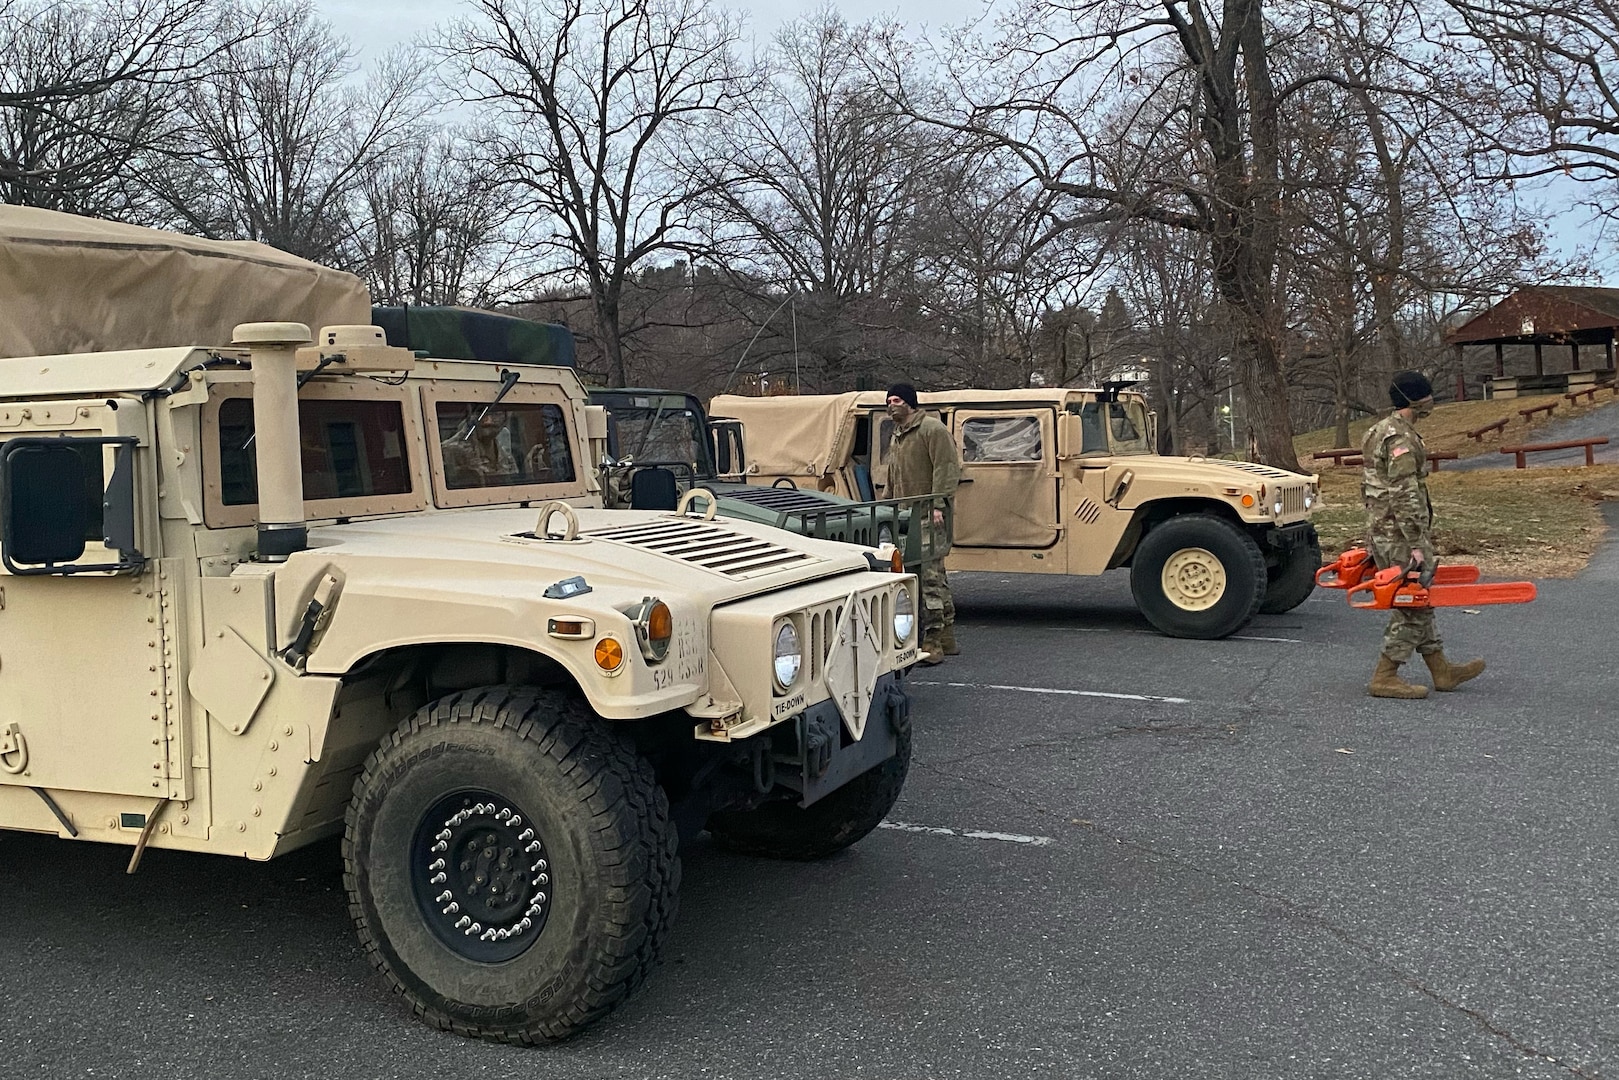 Virginia National Guard Soldiers stage vehicles for possible winter storm response operations Jan. 15, 2022, in Staunton, Virginia.